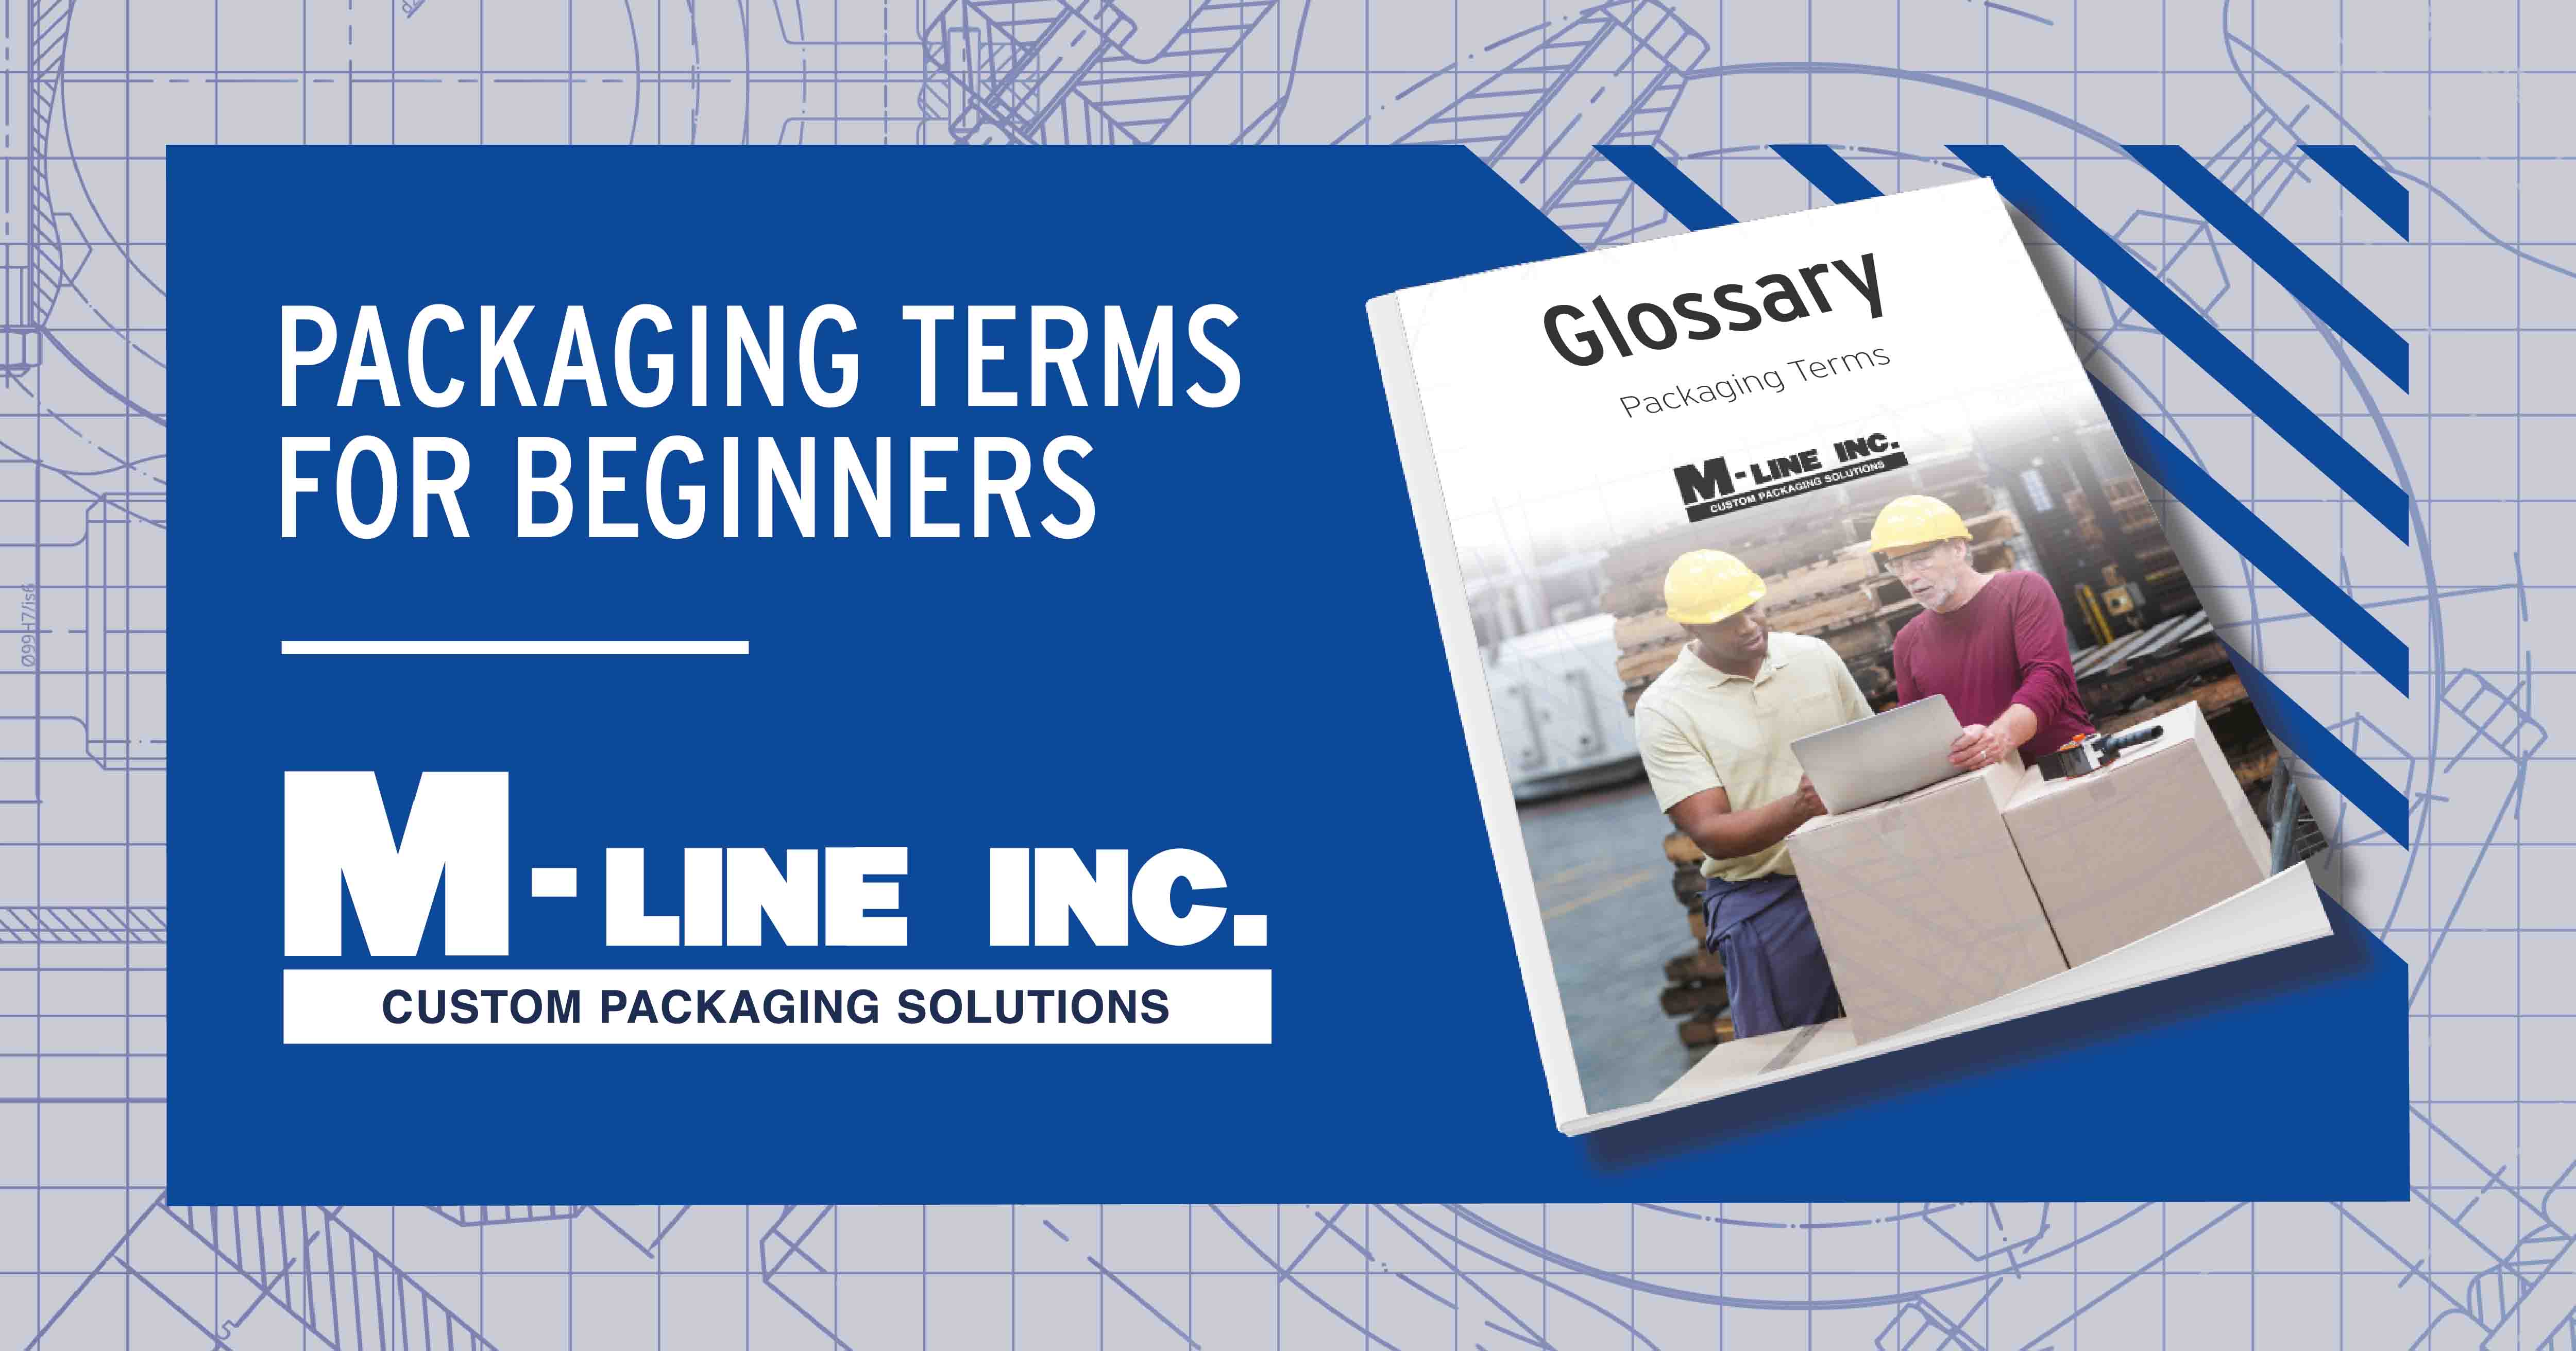 From A to Z: A Glossary of Packaging Terms for Beginners